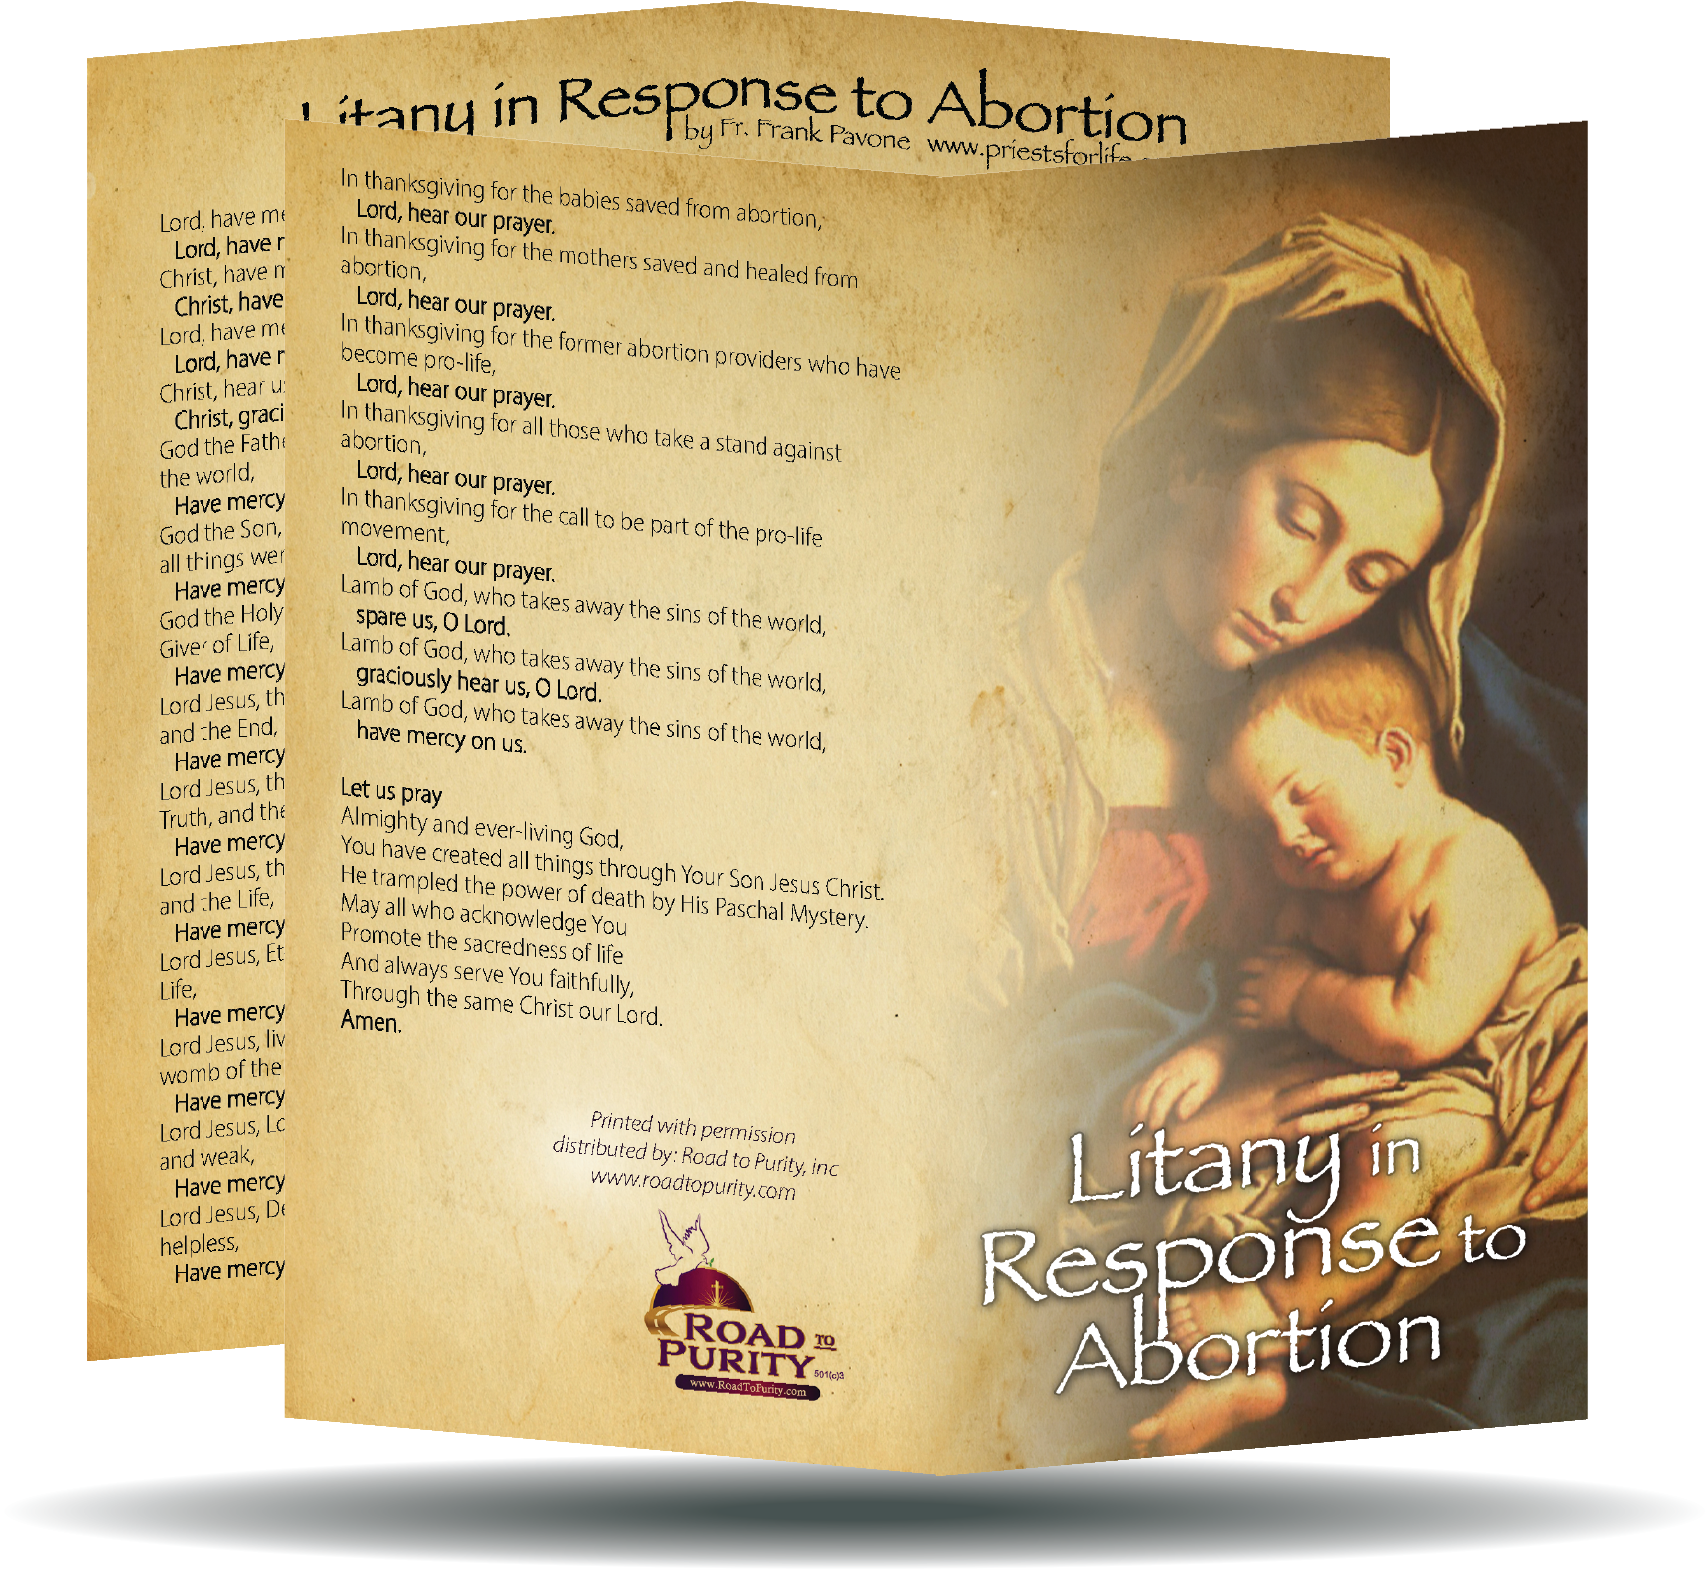 Litany in Response to Abortion